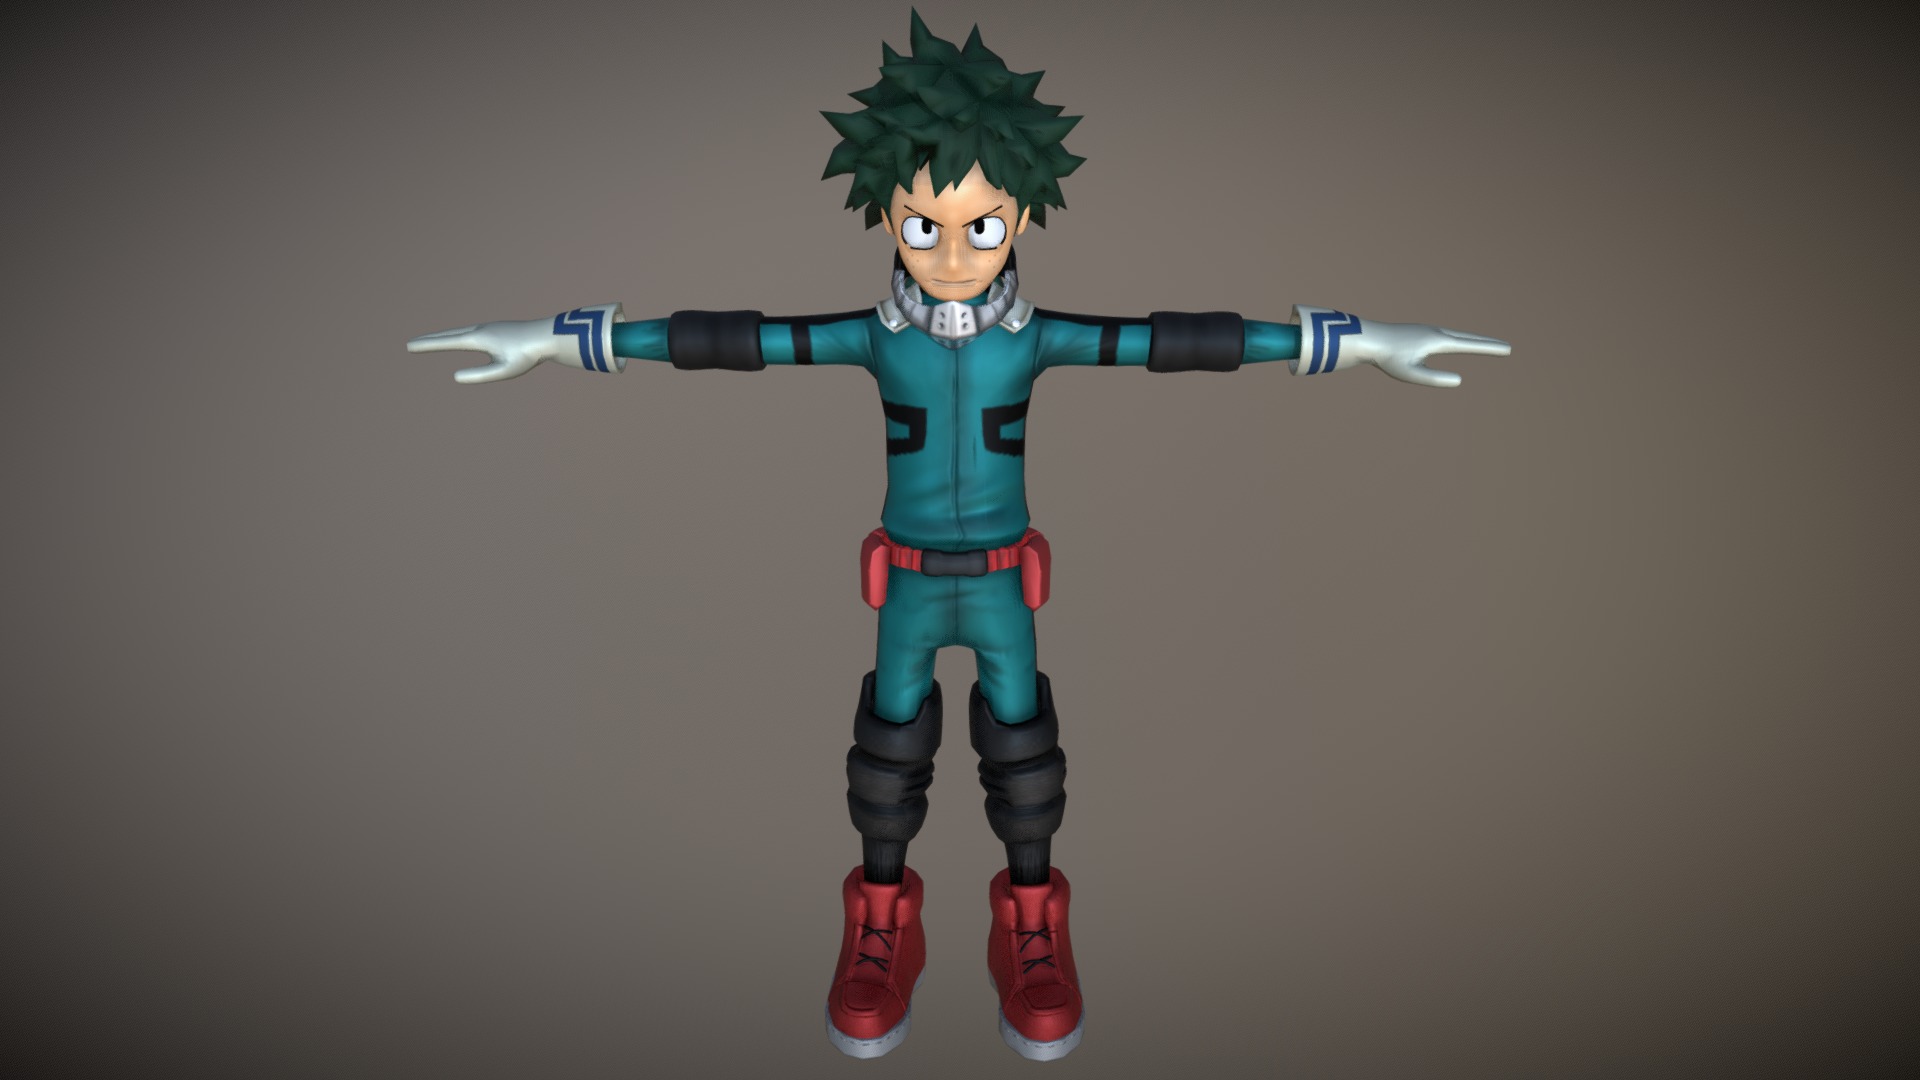 The main character from My Hero Academia.
Izuku Midoriya.
Made in Maya, Zbrush.

Please support me by buying the model, so I can improve and make more! You can find other models of the anime down below.
Bakugo Katsuki : https://sketchfab.com/models/e976bae6e7534f7ca74f3fb4f4700bc5?ref=related

Shoto Todoroki :  https://sketchfab.com/models/fe085910e0804e1387ceec0763dd5fc5

It’s easy to use! Do download the FREE AccuRIG auto-rigging tool: https://actorcore.reallusion.com/auto-rig


AccuRIG - Izuku Midoriya - Buy Royalty Free 3D model by amiruler 3d model